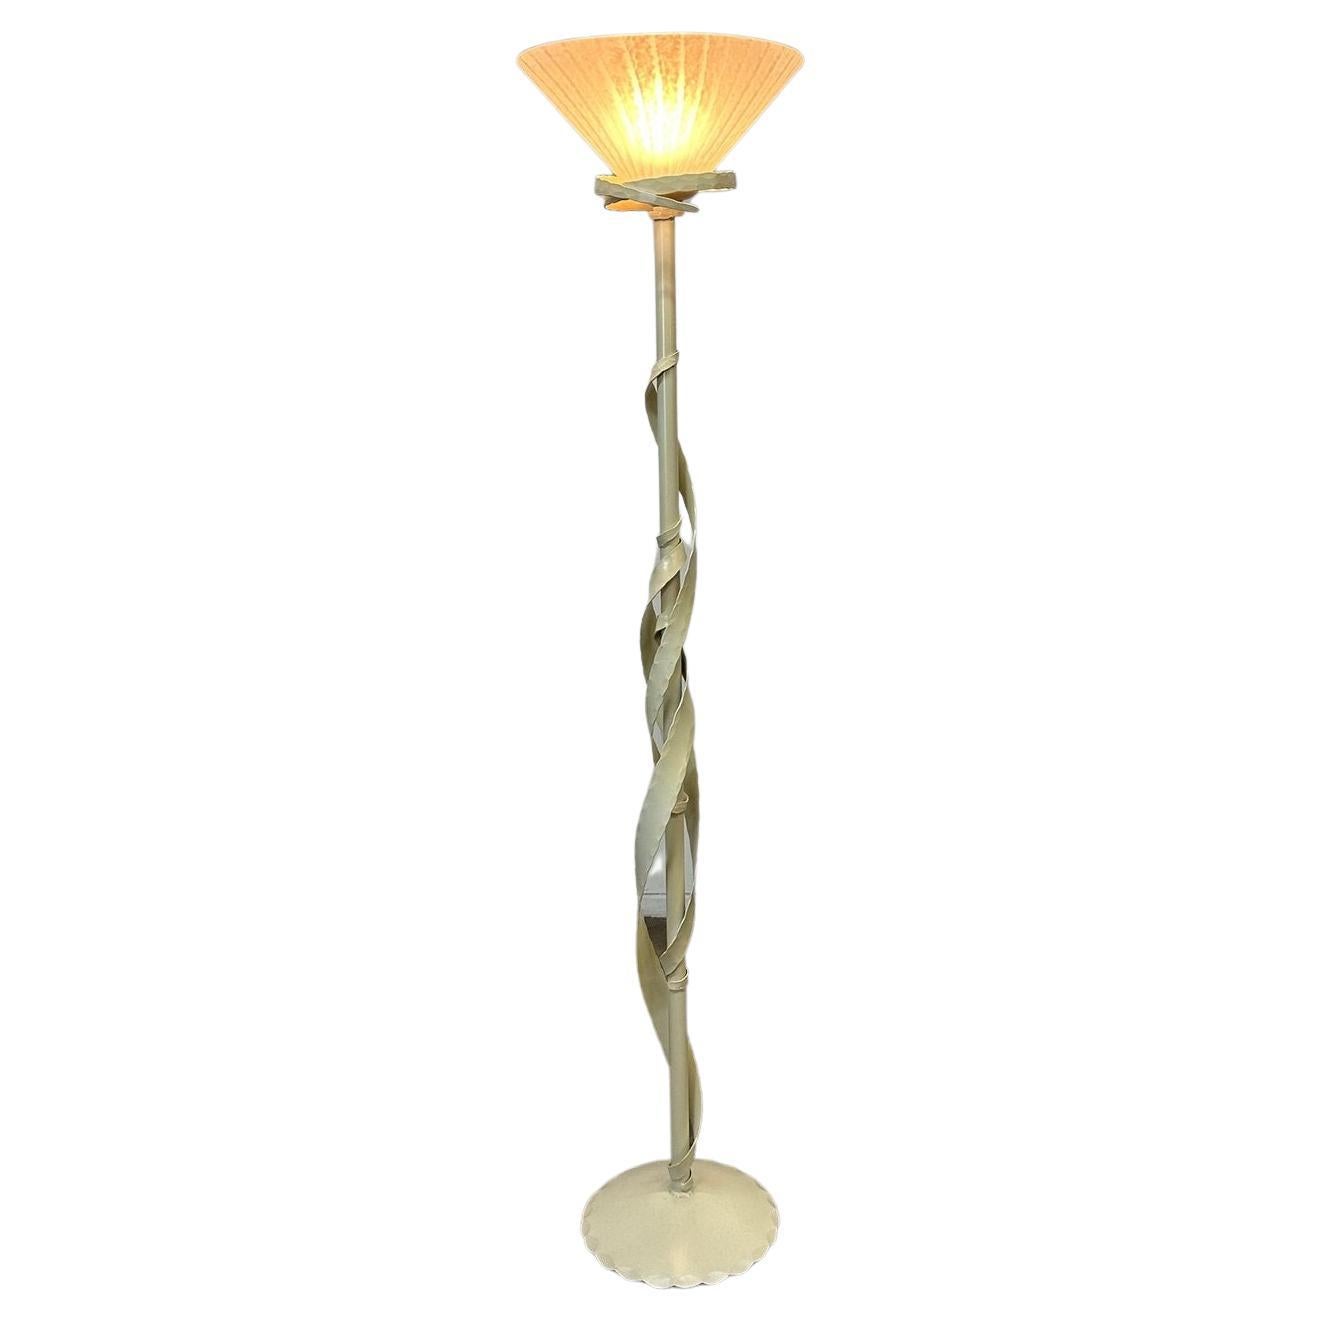 Torch Cut Style Floor Lamp, New Lacquer